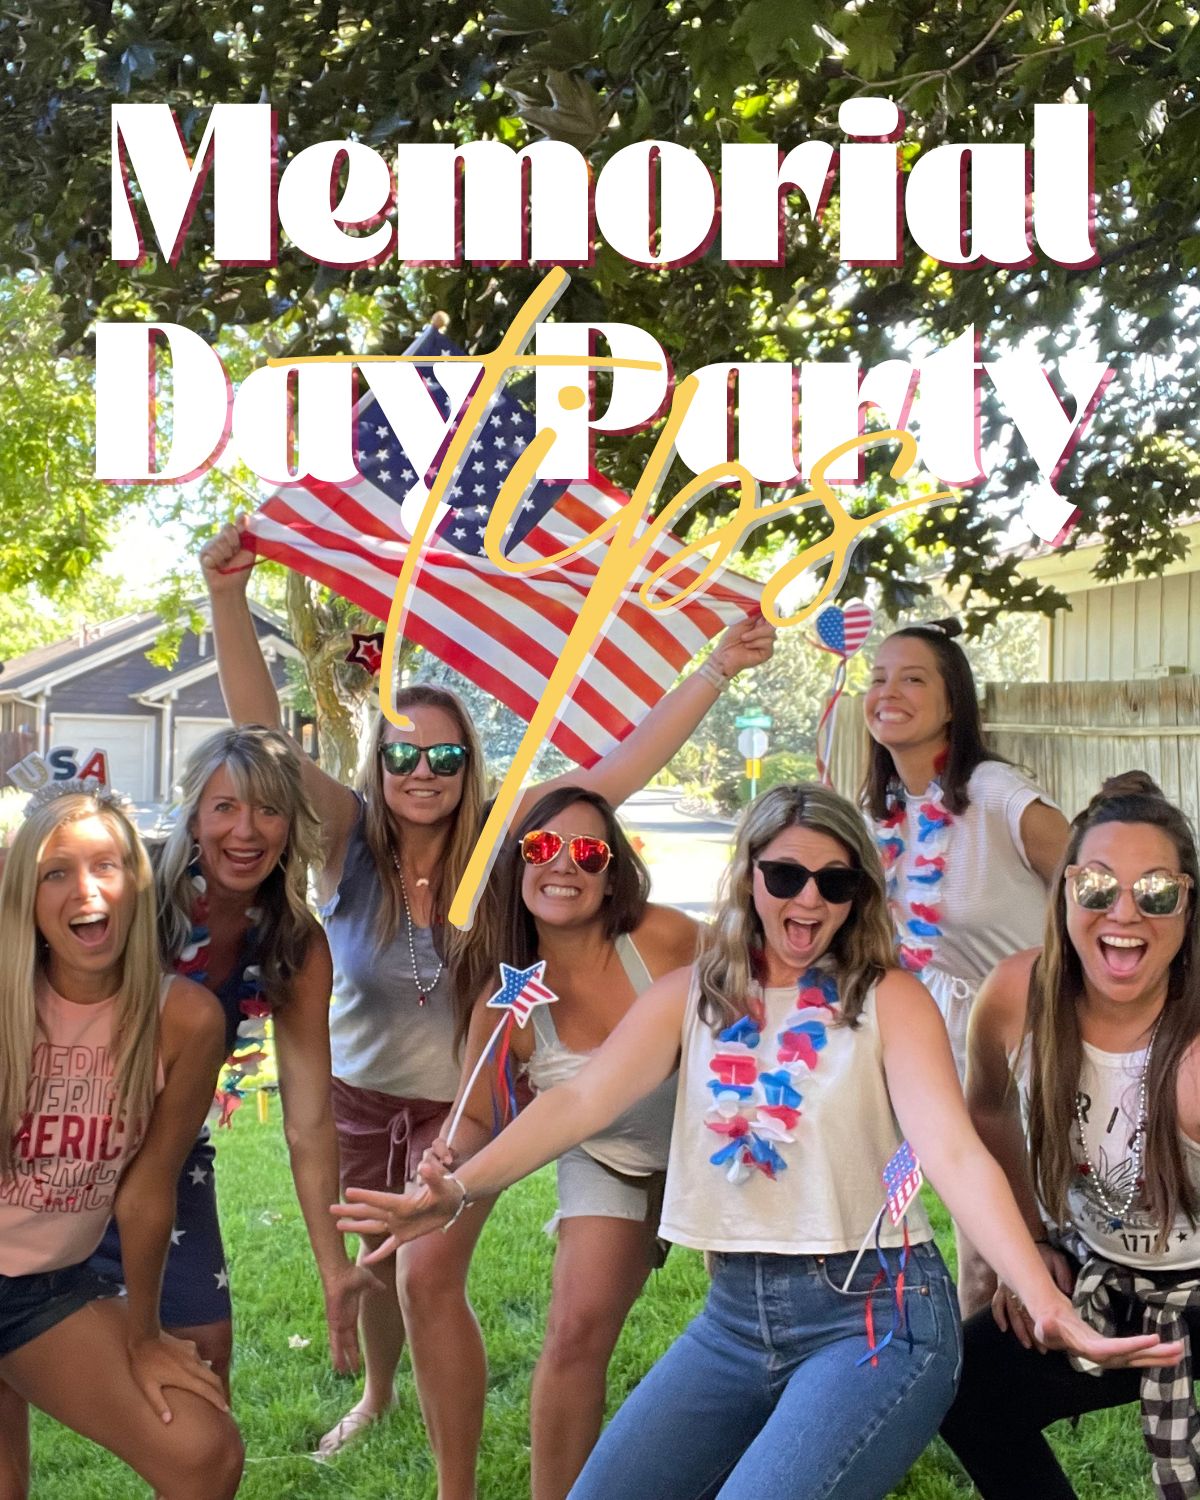 Fun friends for a Memorial Day party